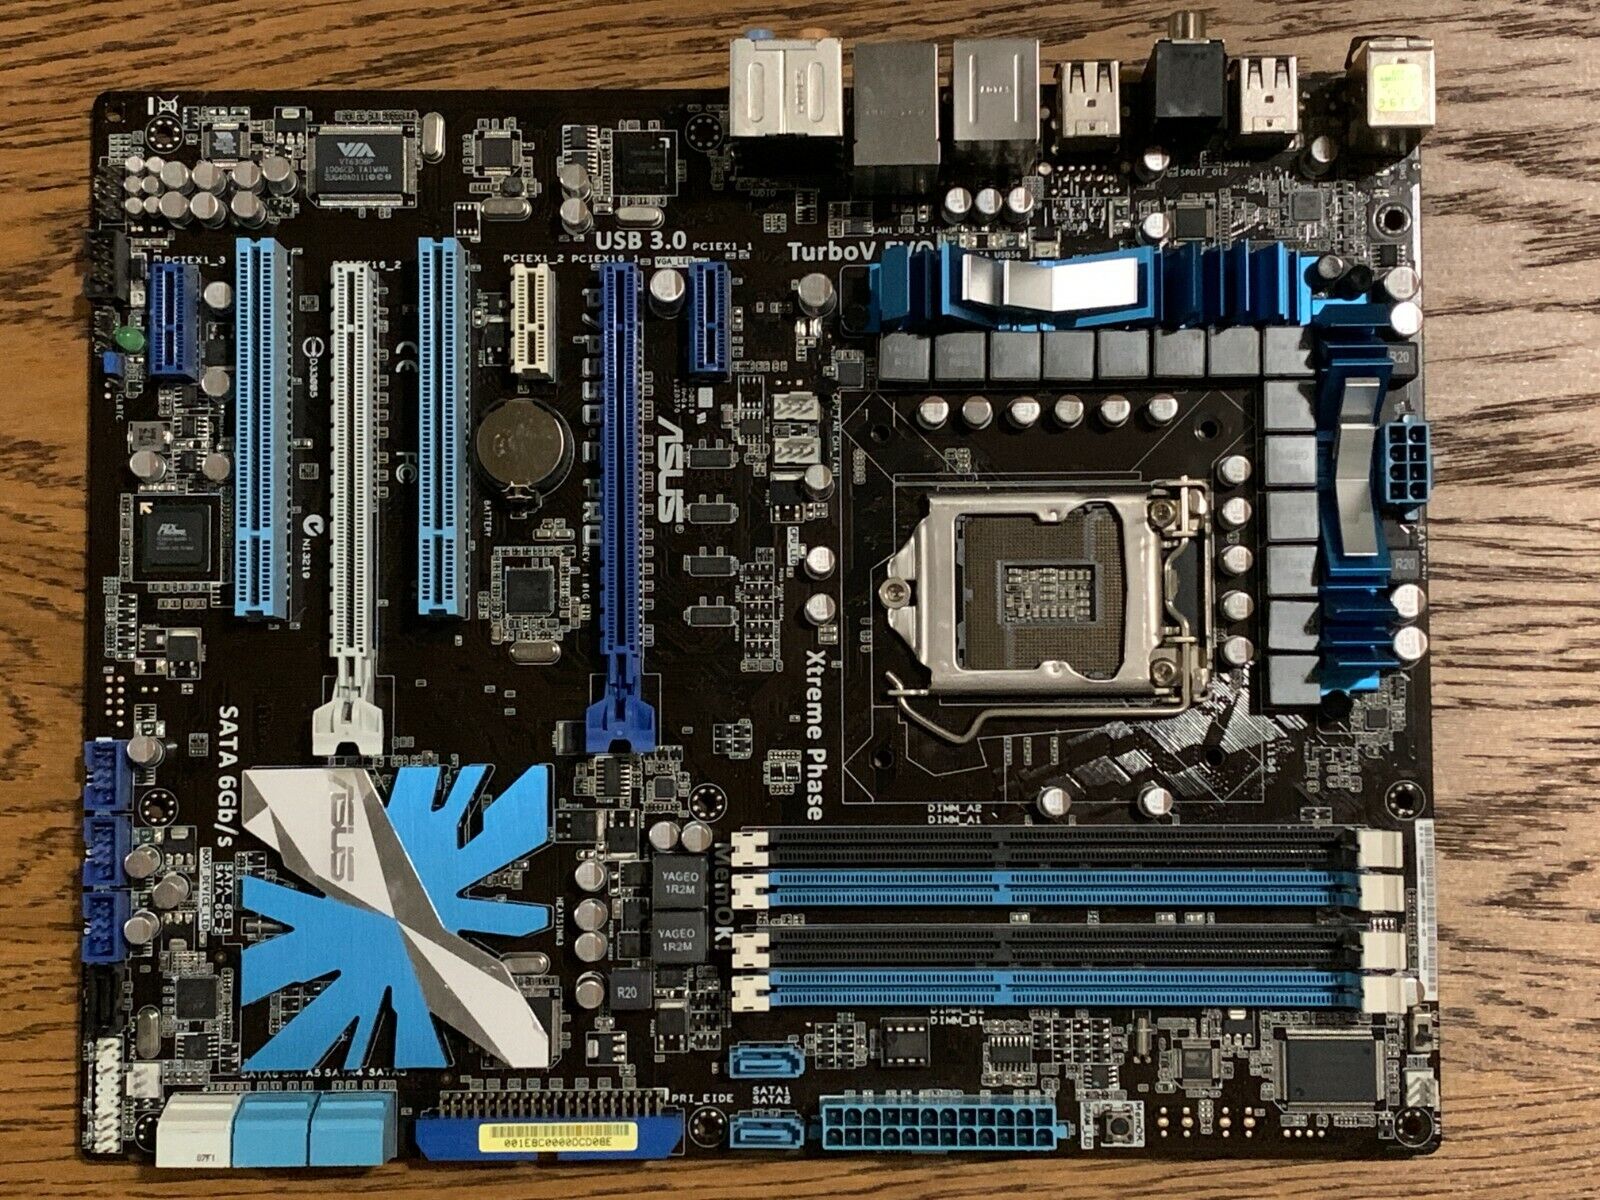 ASUS P7P55D-E PRO ATX Motherboard LGA1156 DDR3 - I/O Shield Not Included